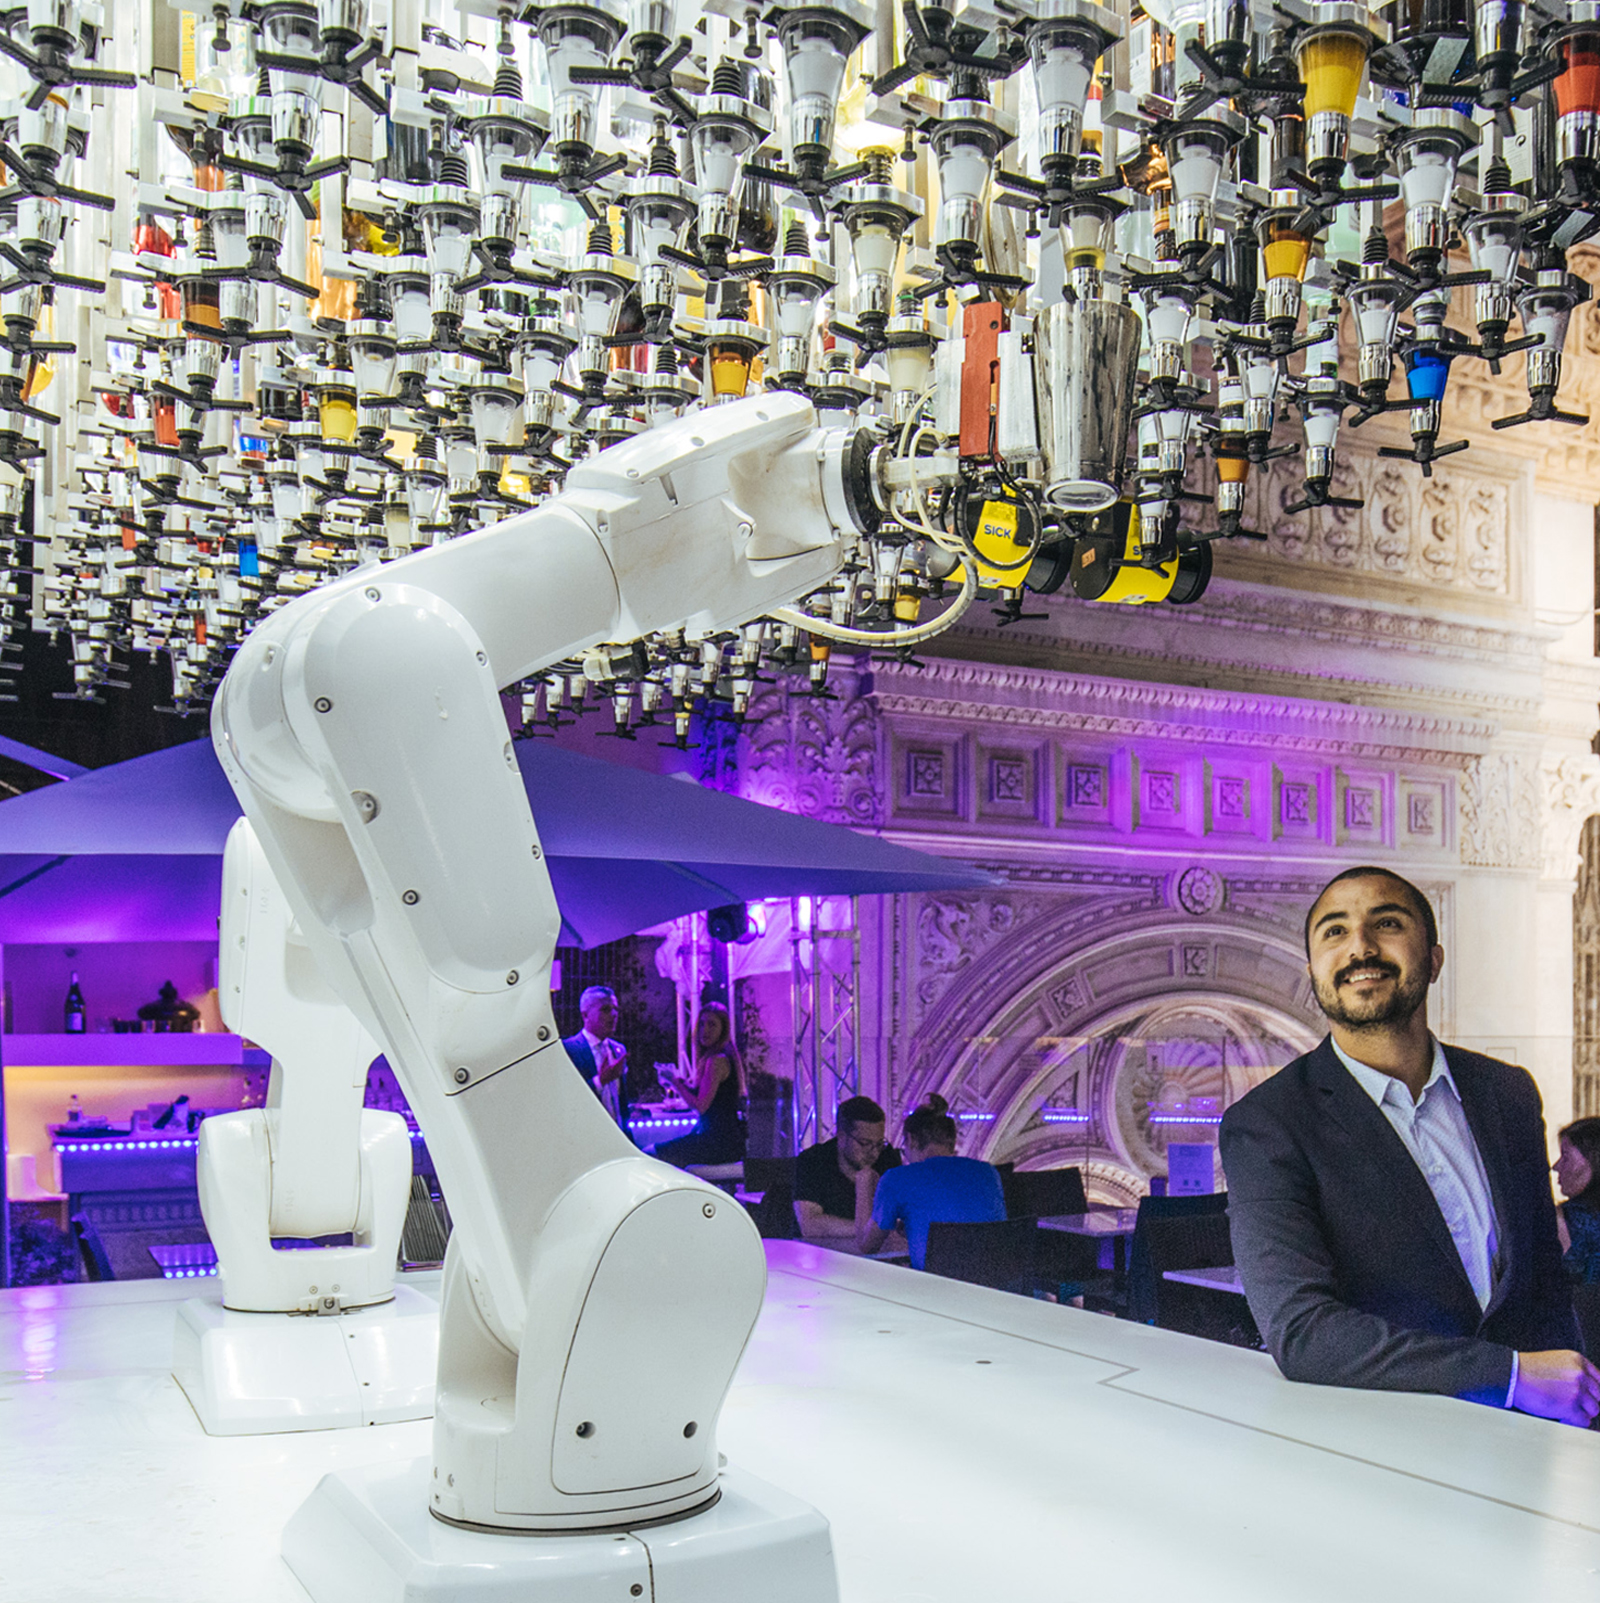 Mix it, Toni! Vollautomatisches Bar-System mit Roboter-Rooftop-Barkeeper